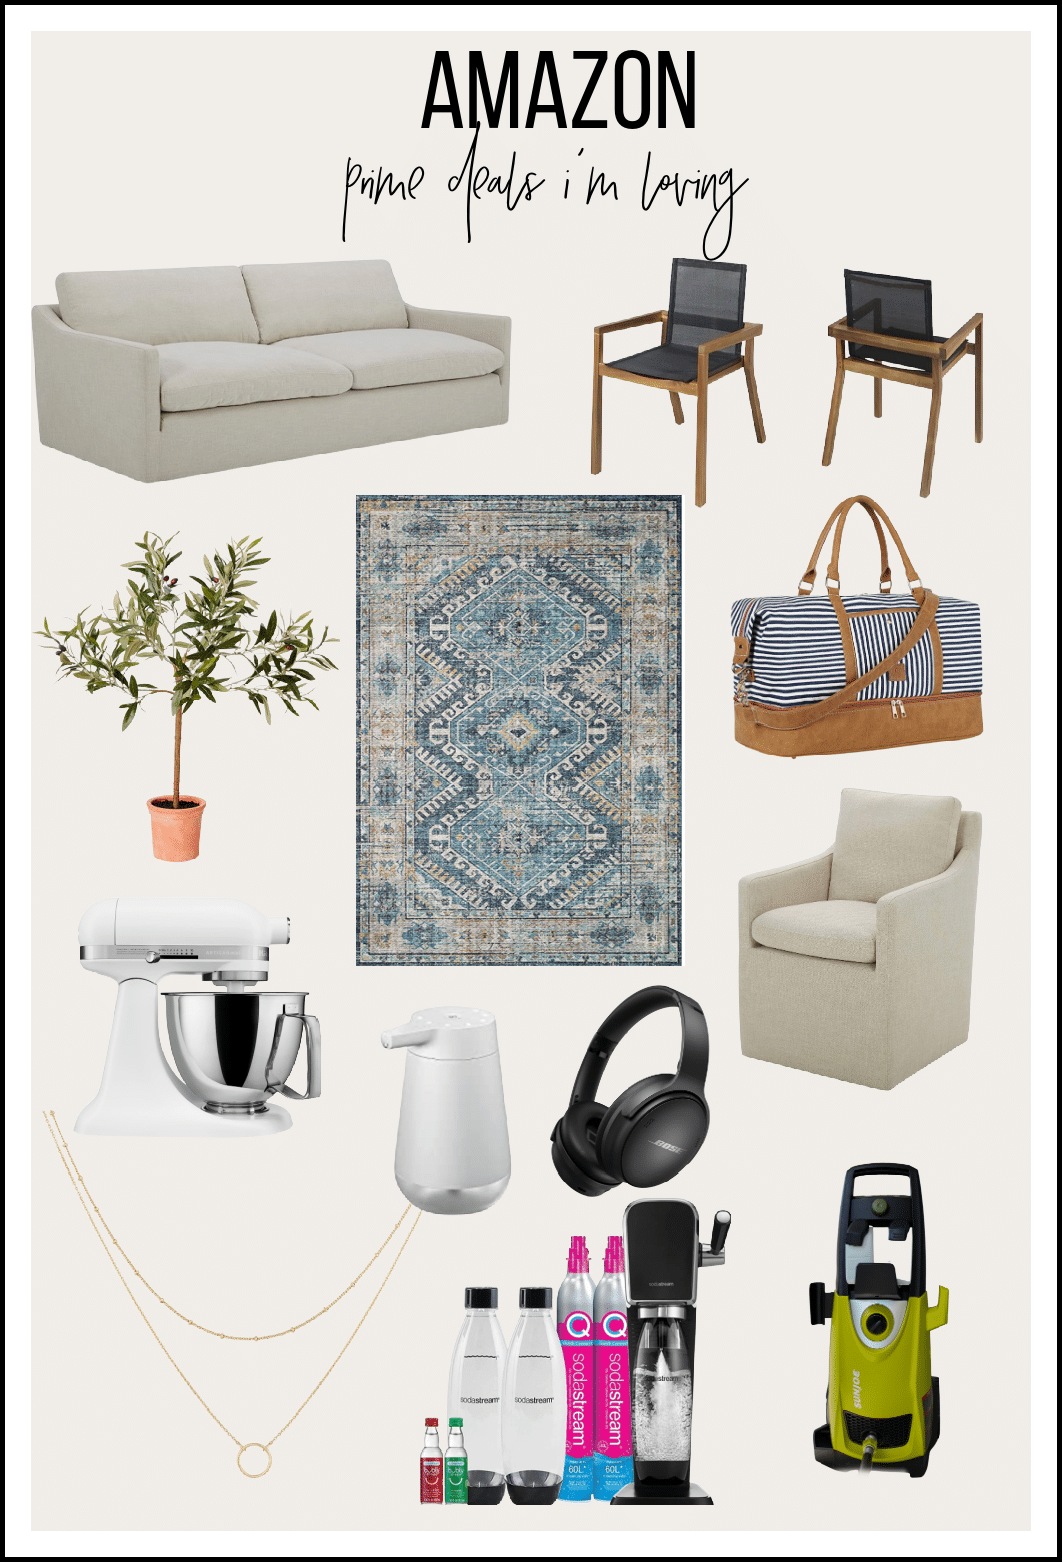 Amazon Prime Day Deals I'm Loving From Furnishings to Kitchen Essentials. Favorites from City Farmhouse by Jennifer O'Brien